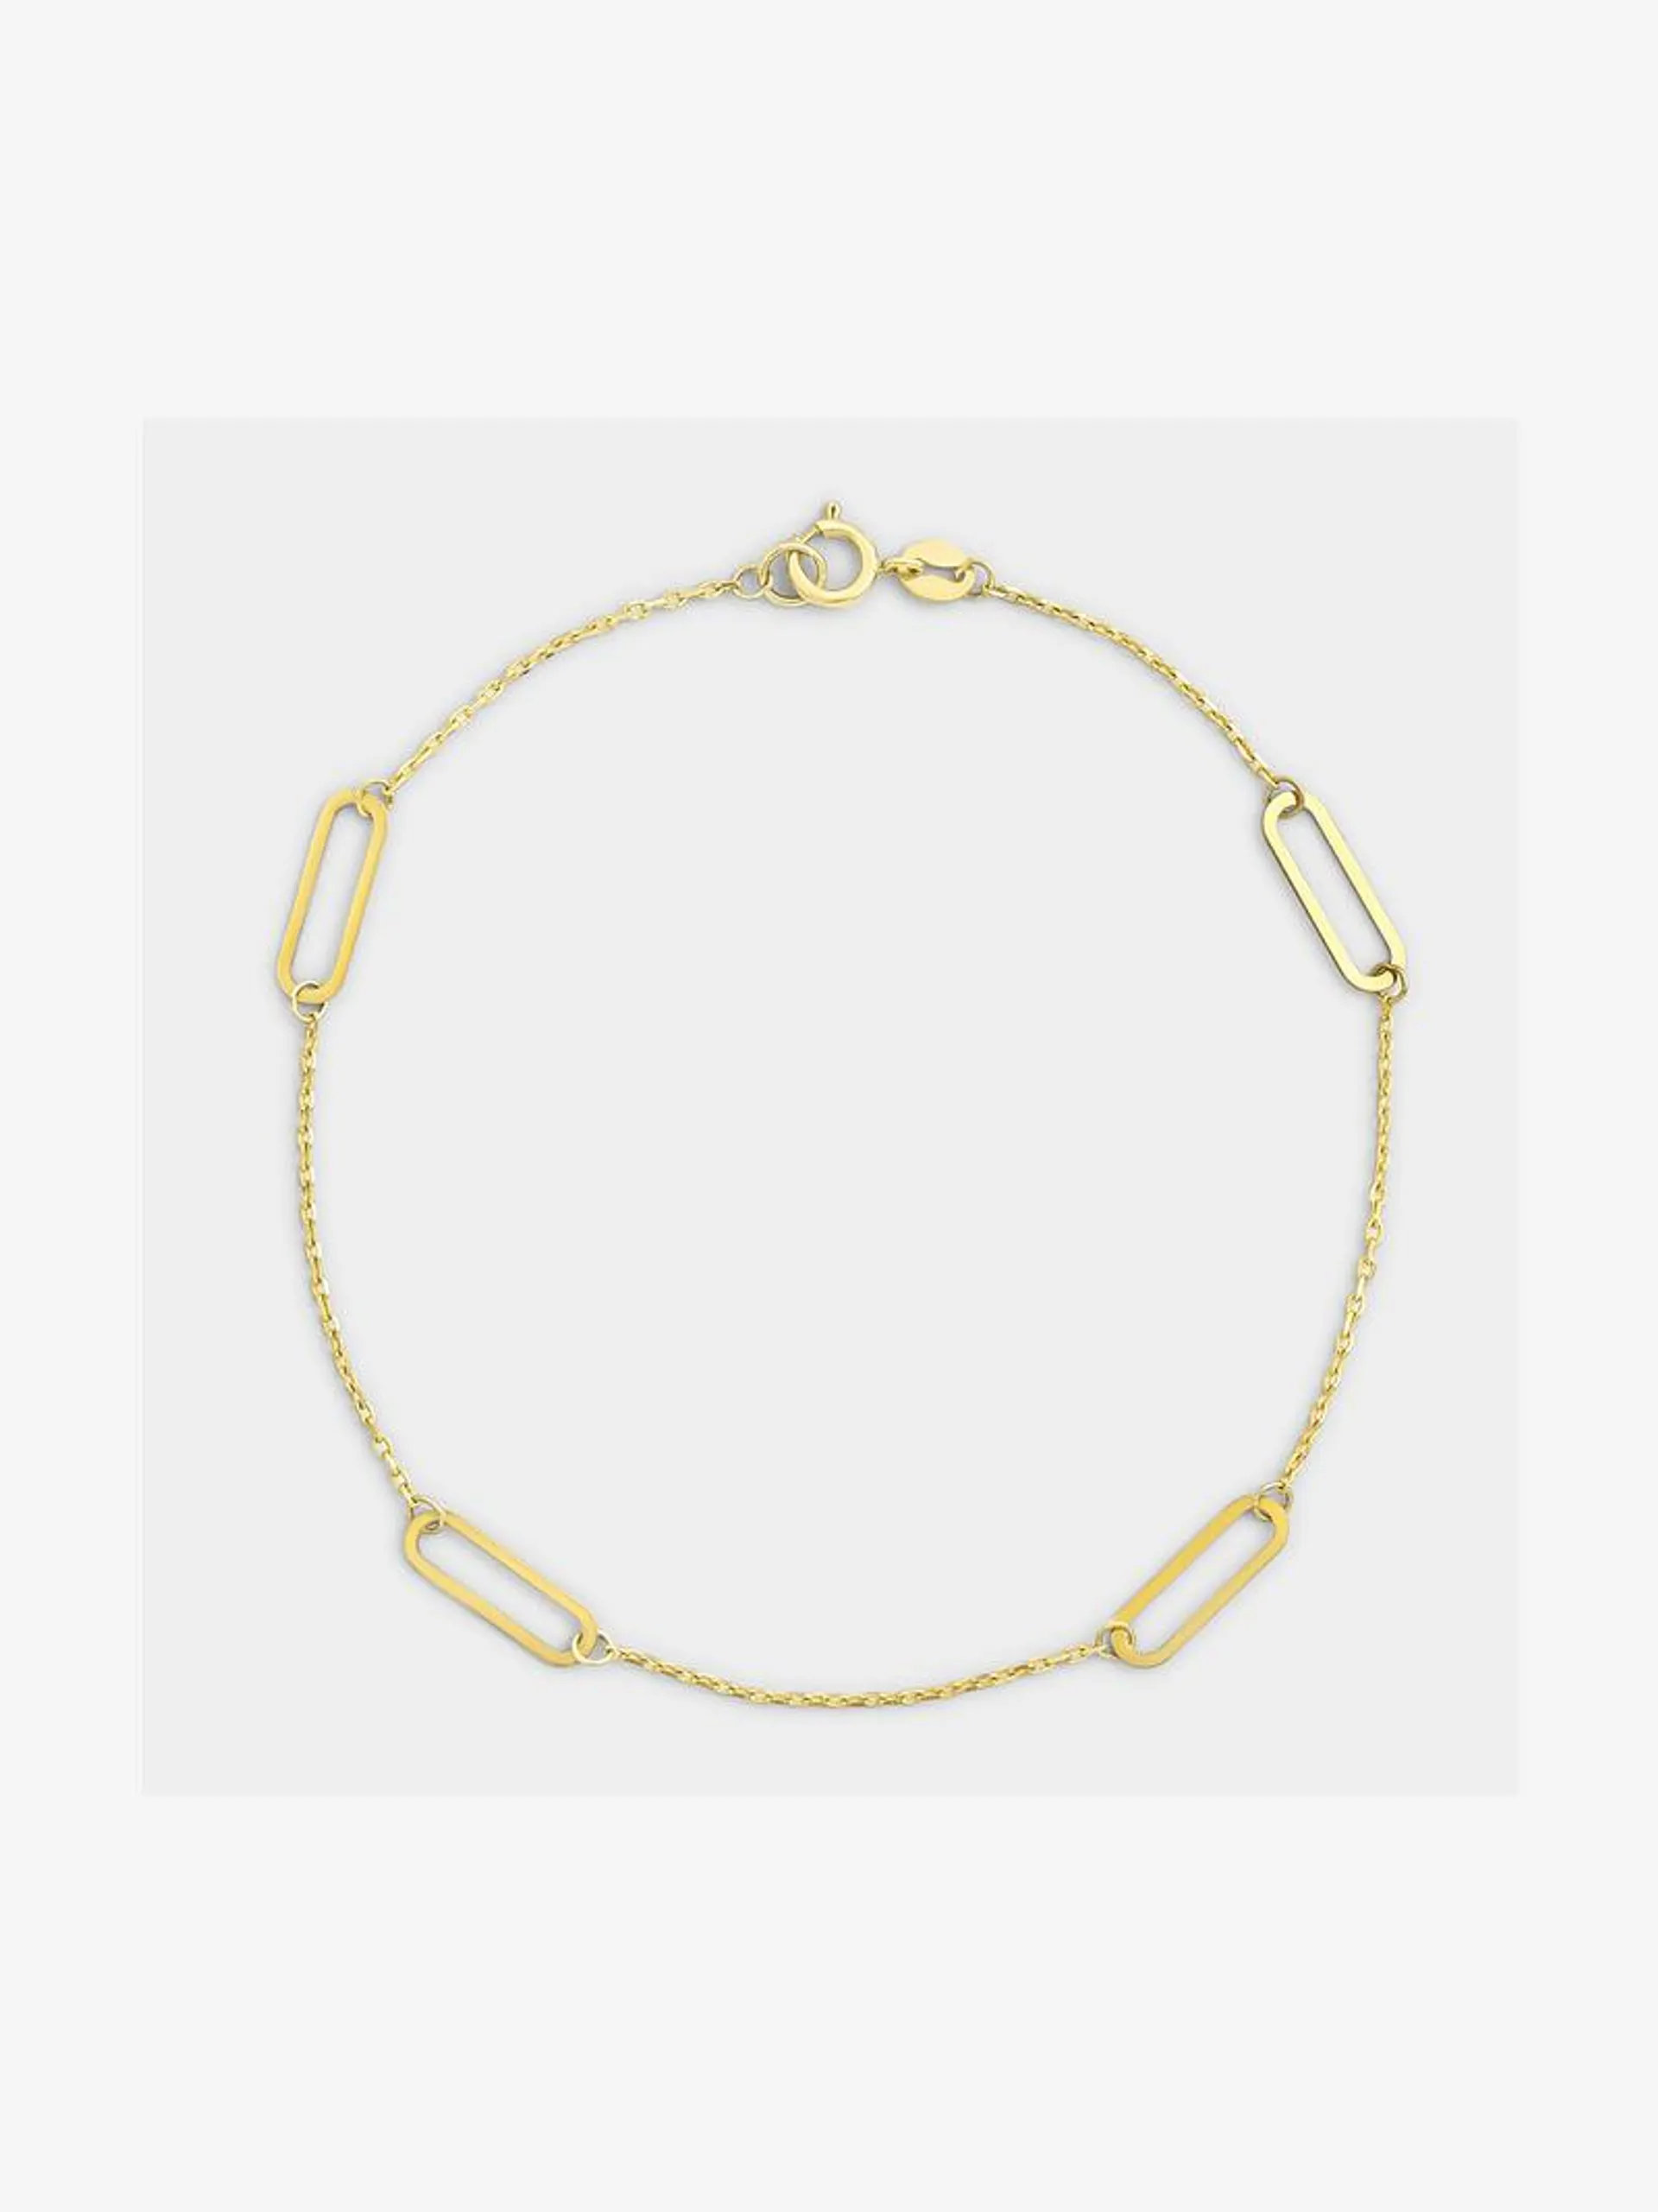 Yellow Gold Paperclip Station Bracelet